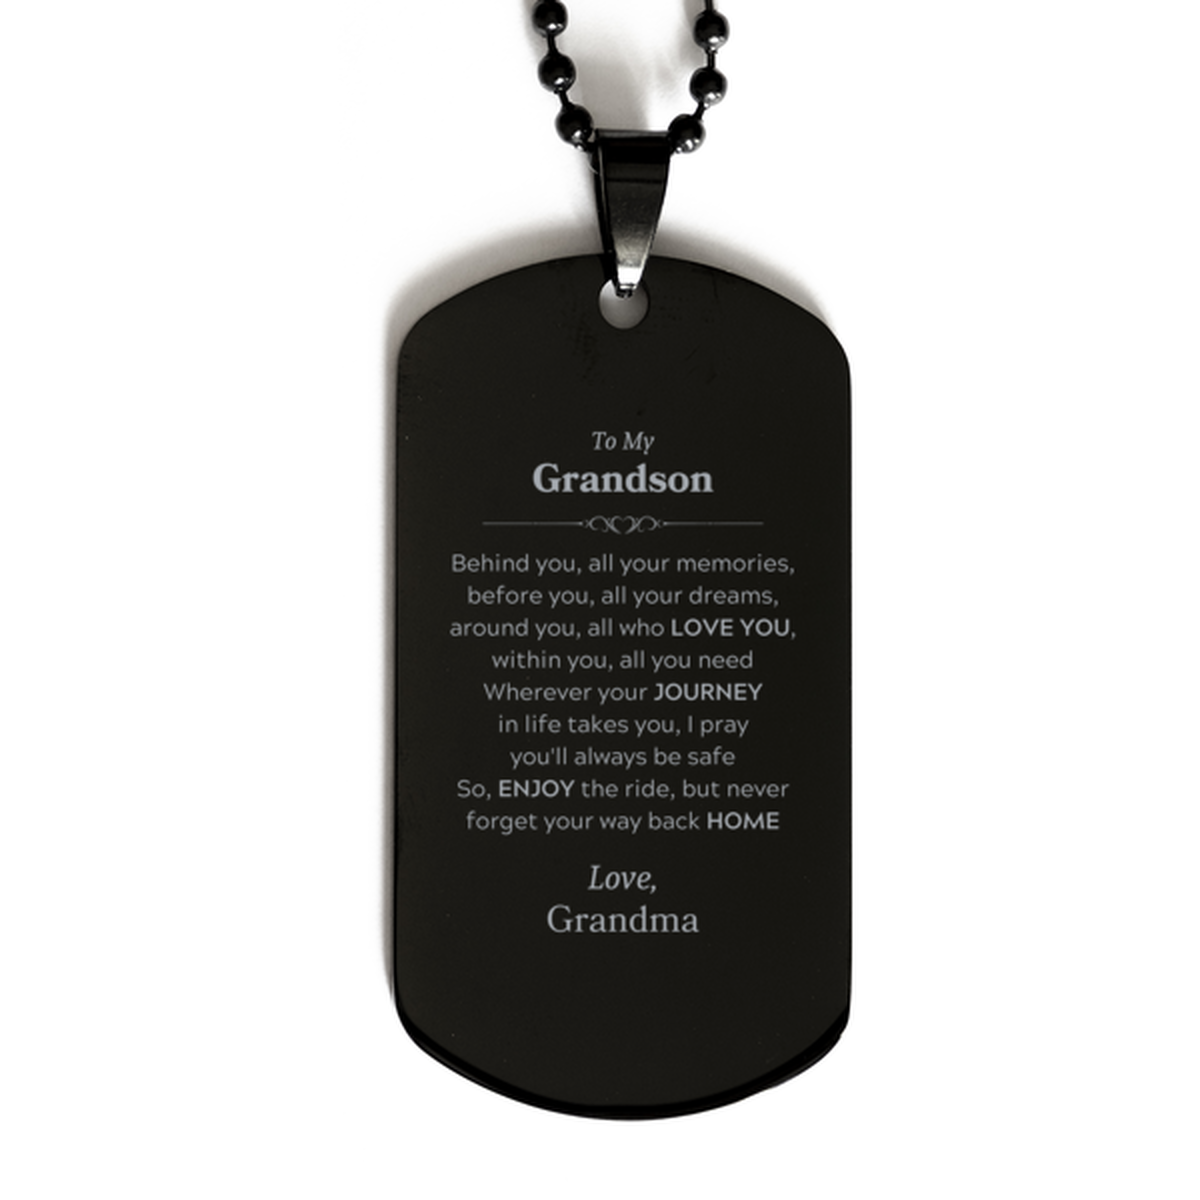 To My Grandson Graduation Gifts from Grandma, Grandson Black Dog Tag Christmas Birthday Gifts for Grandson Behind you, all your memories, before you, all your dreams. Love, Grandma